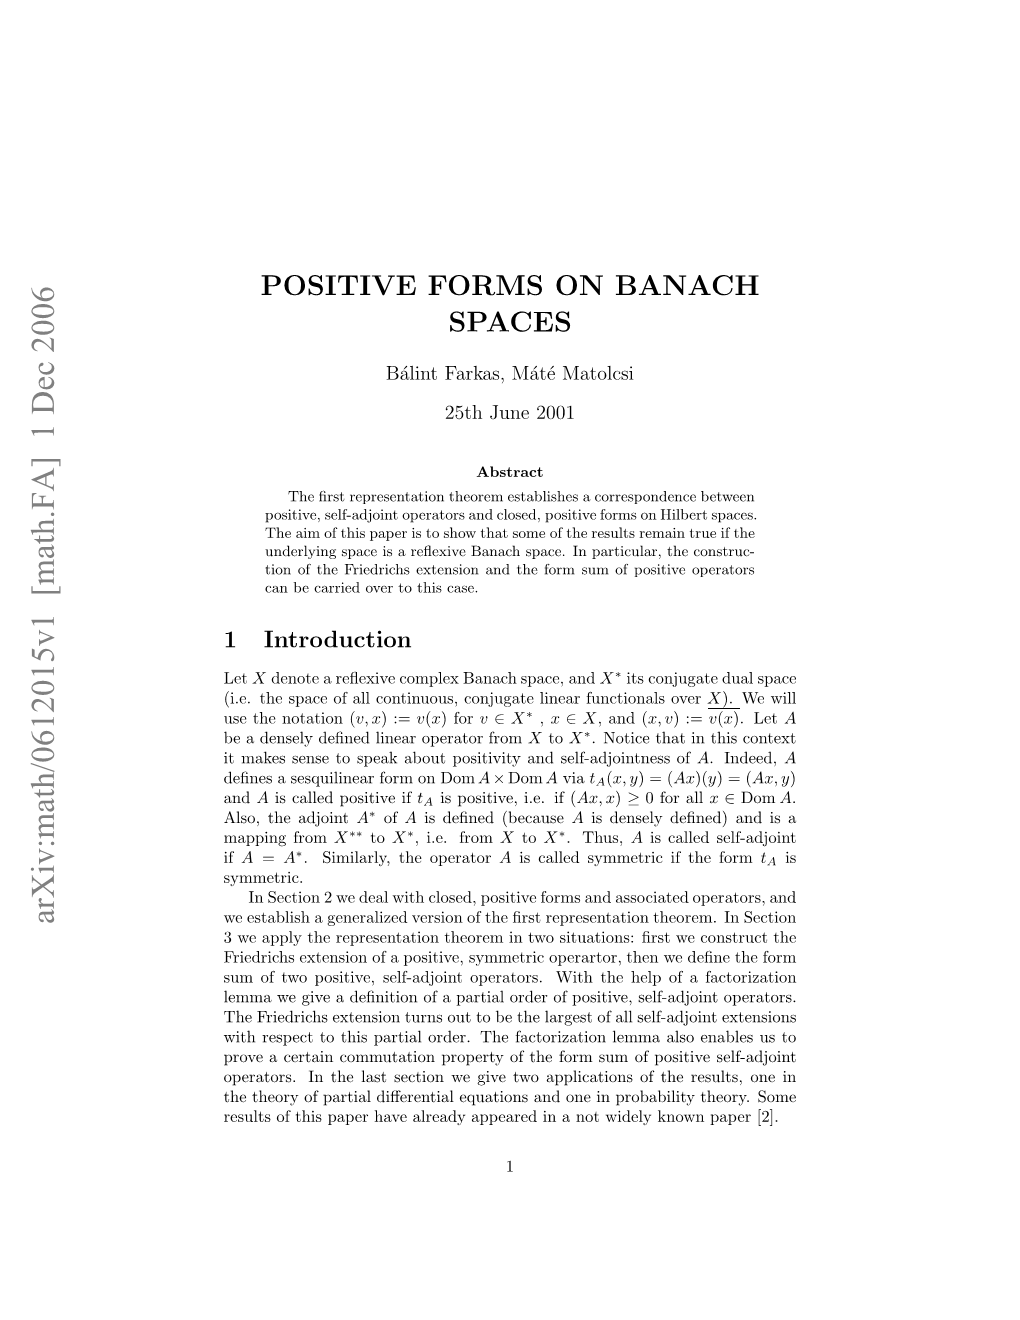 Positive Forms on Banach Spaces